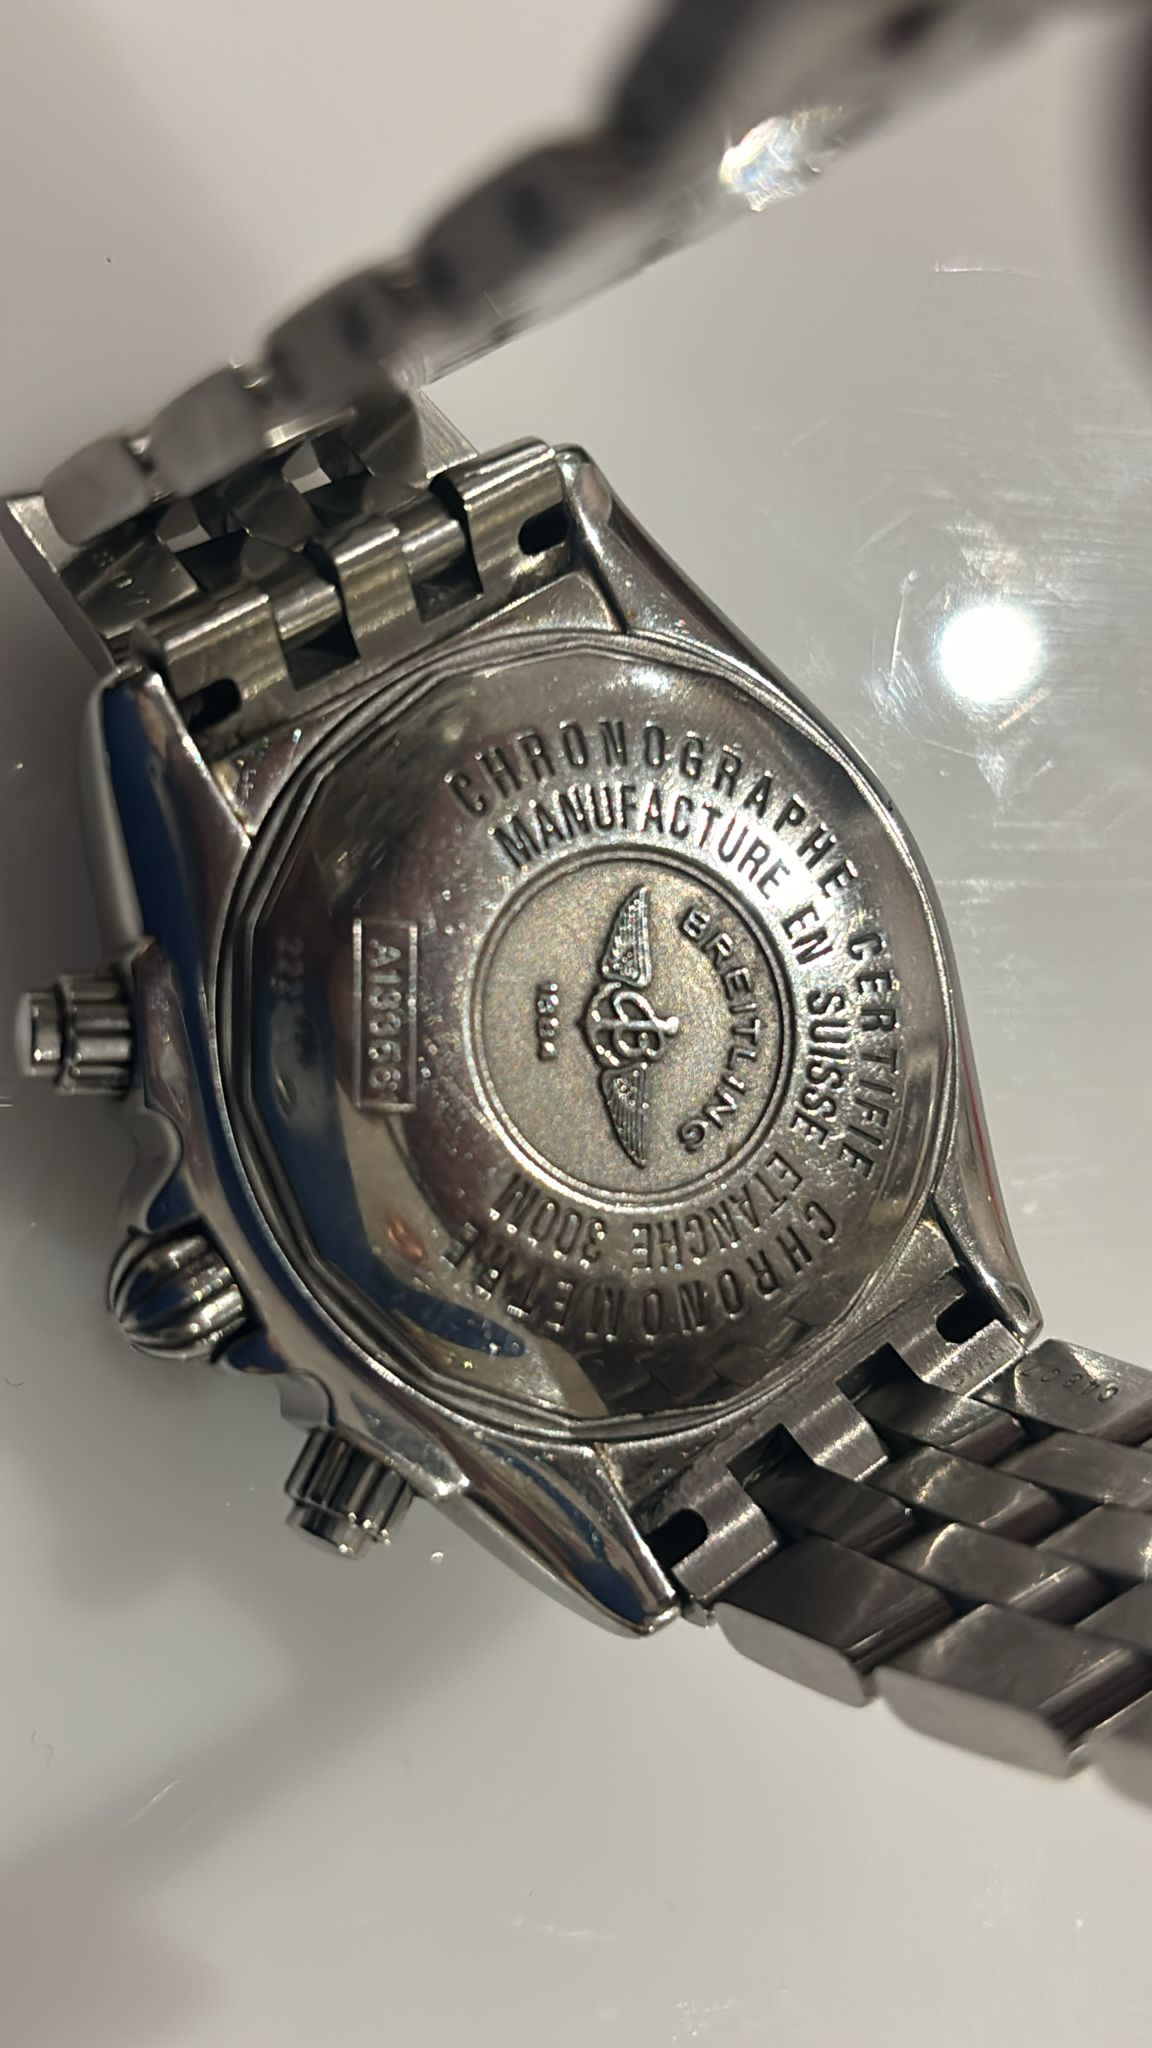 Breitling Chronomat Evolution A13356 Watch - Image 8 of 12